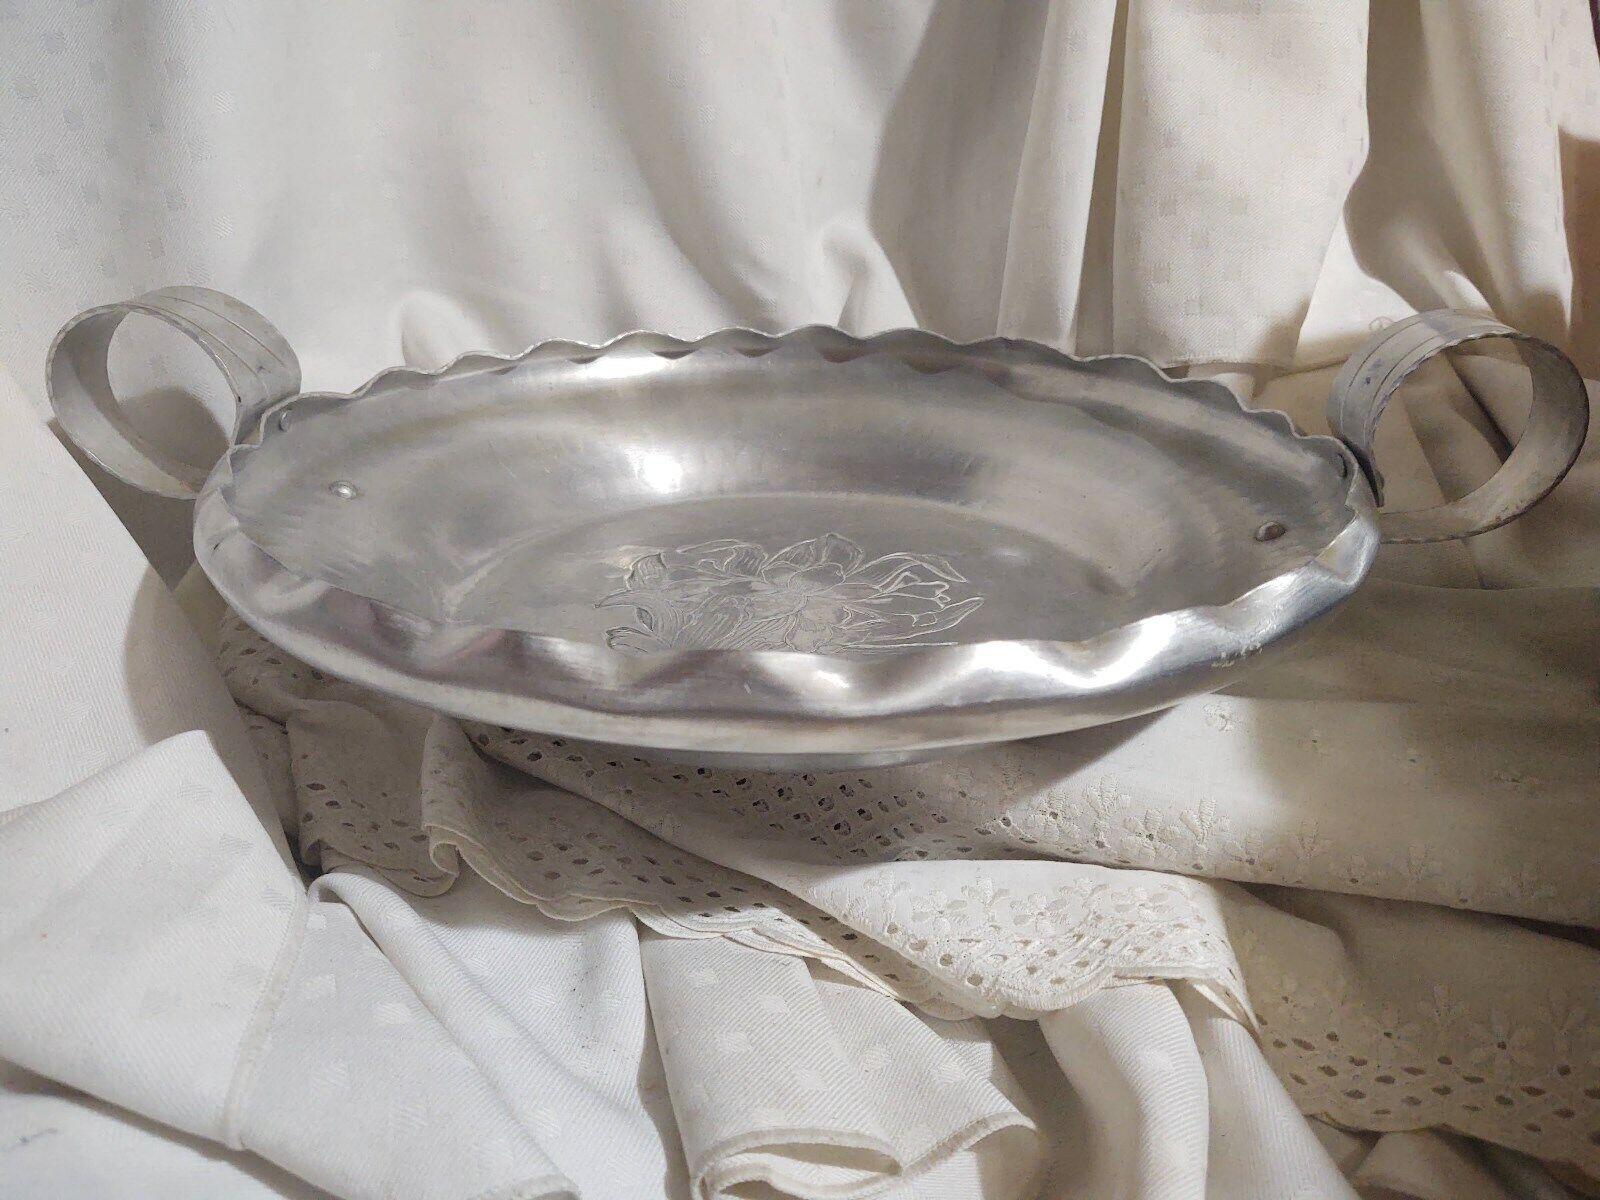 VTG Hammered Aluminum Serving Bowl Tray Signed World Hand Forged ROUND 2 Handles